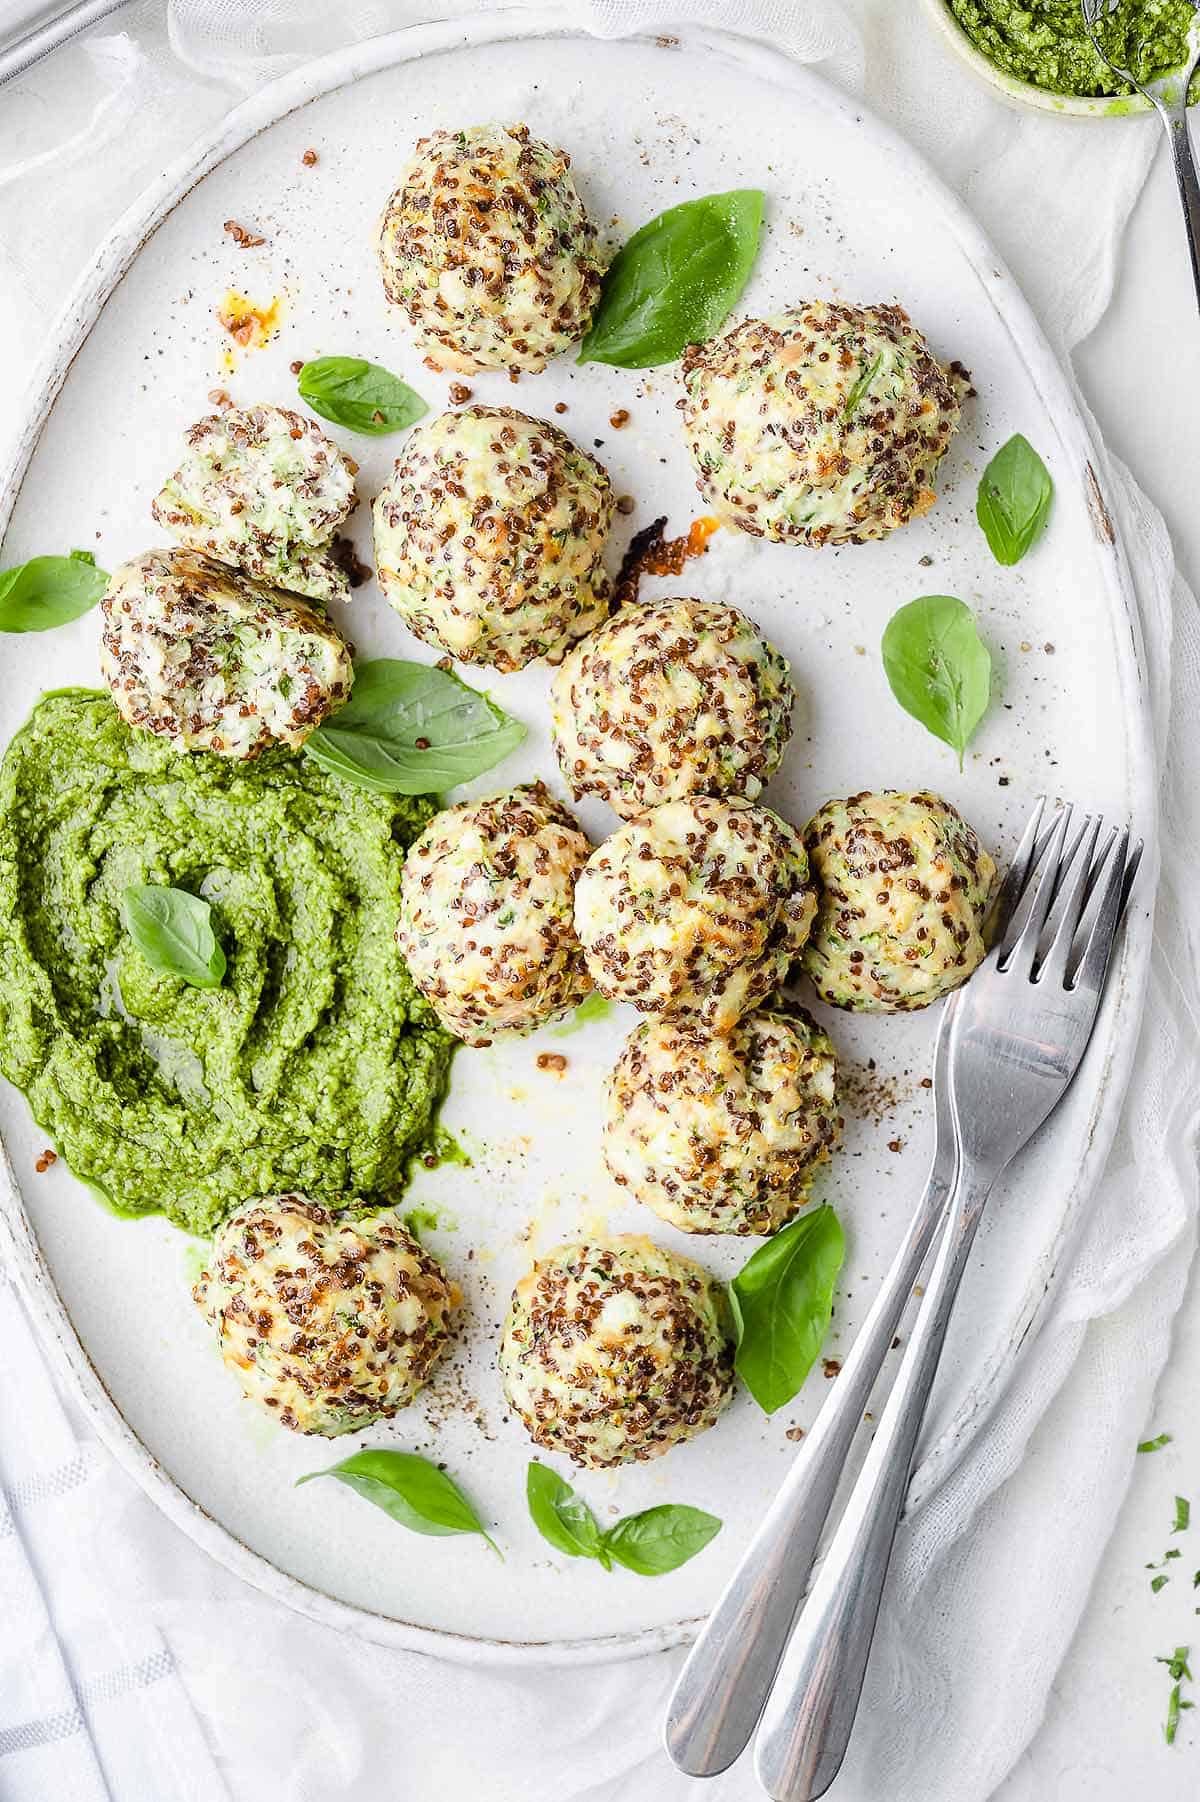 Chicken zucchini meatballs on a large oval white plate. Garnished with fresh basil leaves and served with pesto.